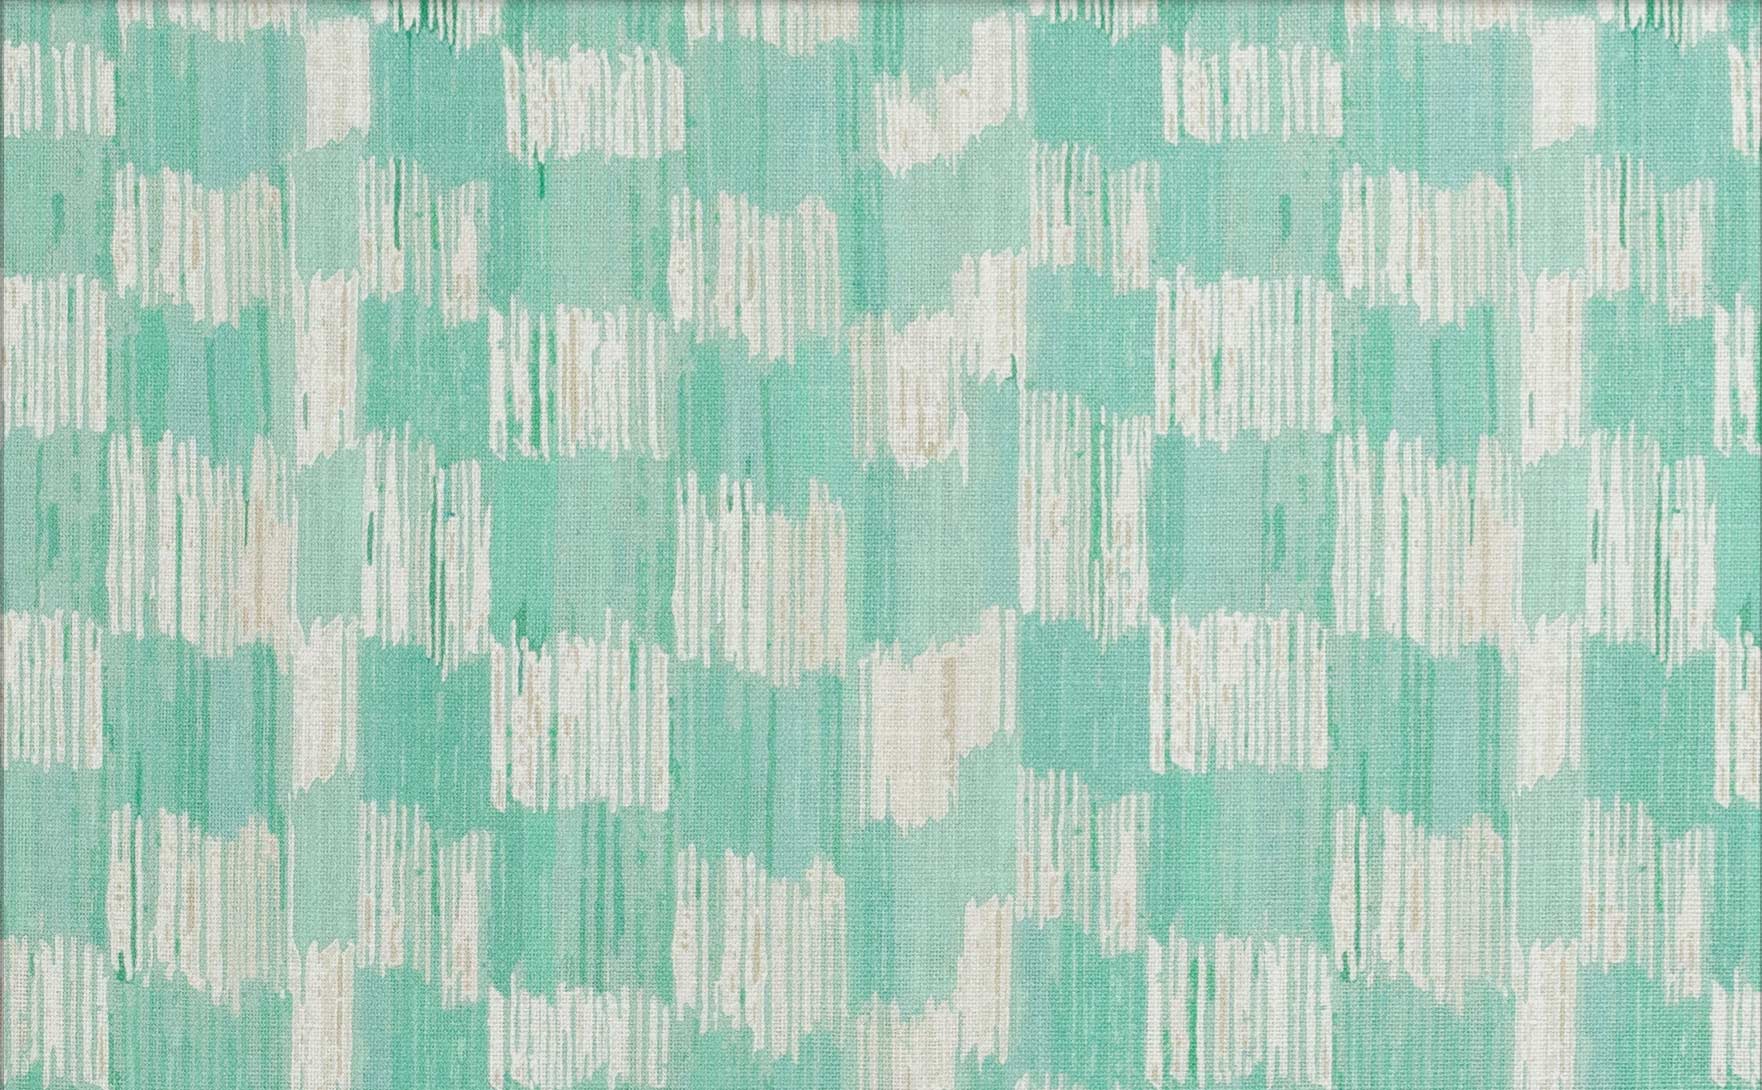 Detail of fabric in an abstract check print in shades of turquoise and cream.